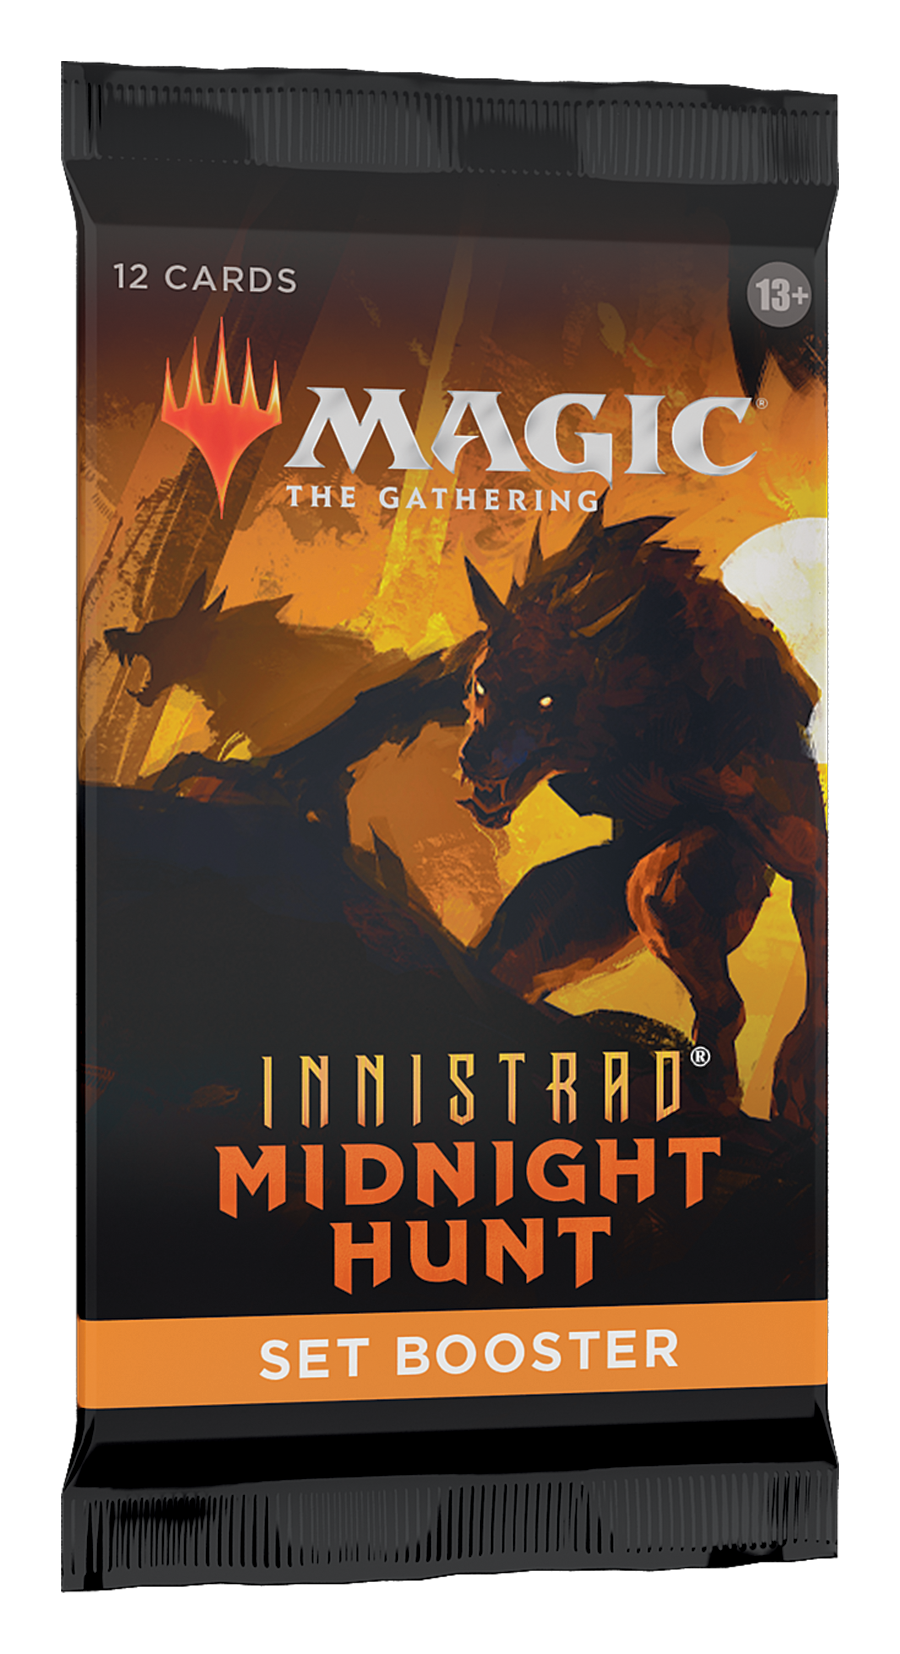 Magic the Gathering CCG: Midnight Hunt Set Booster Pack